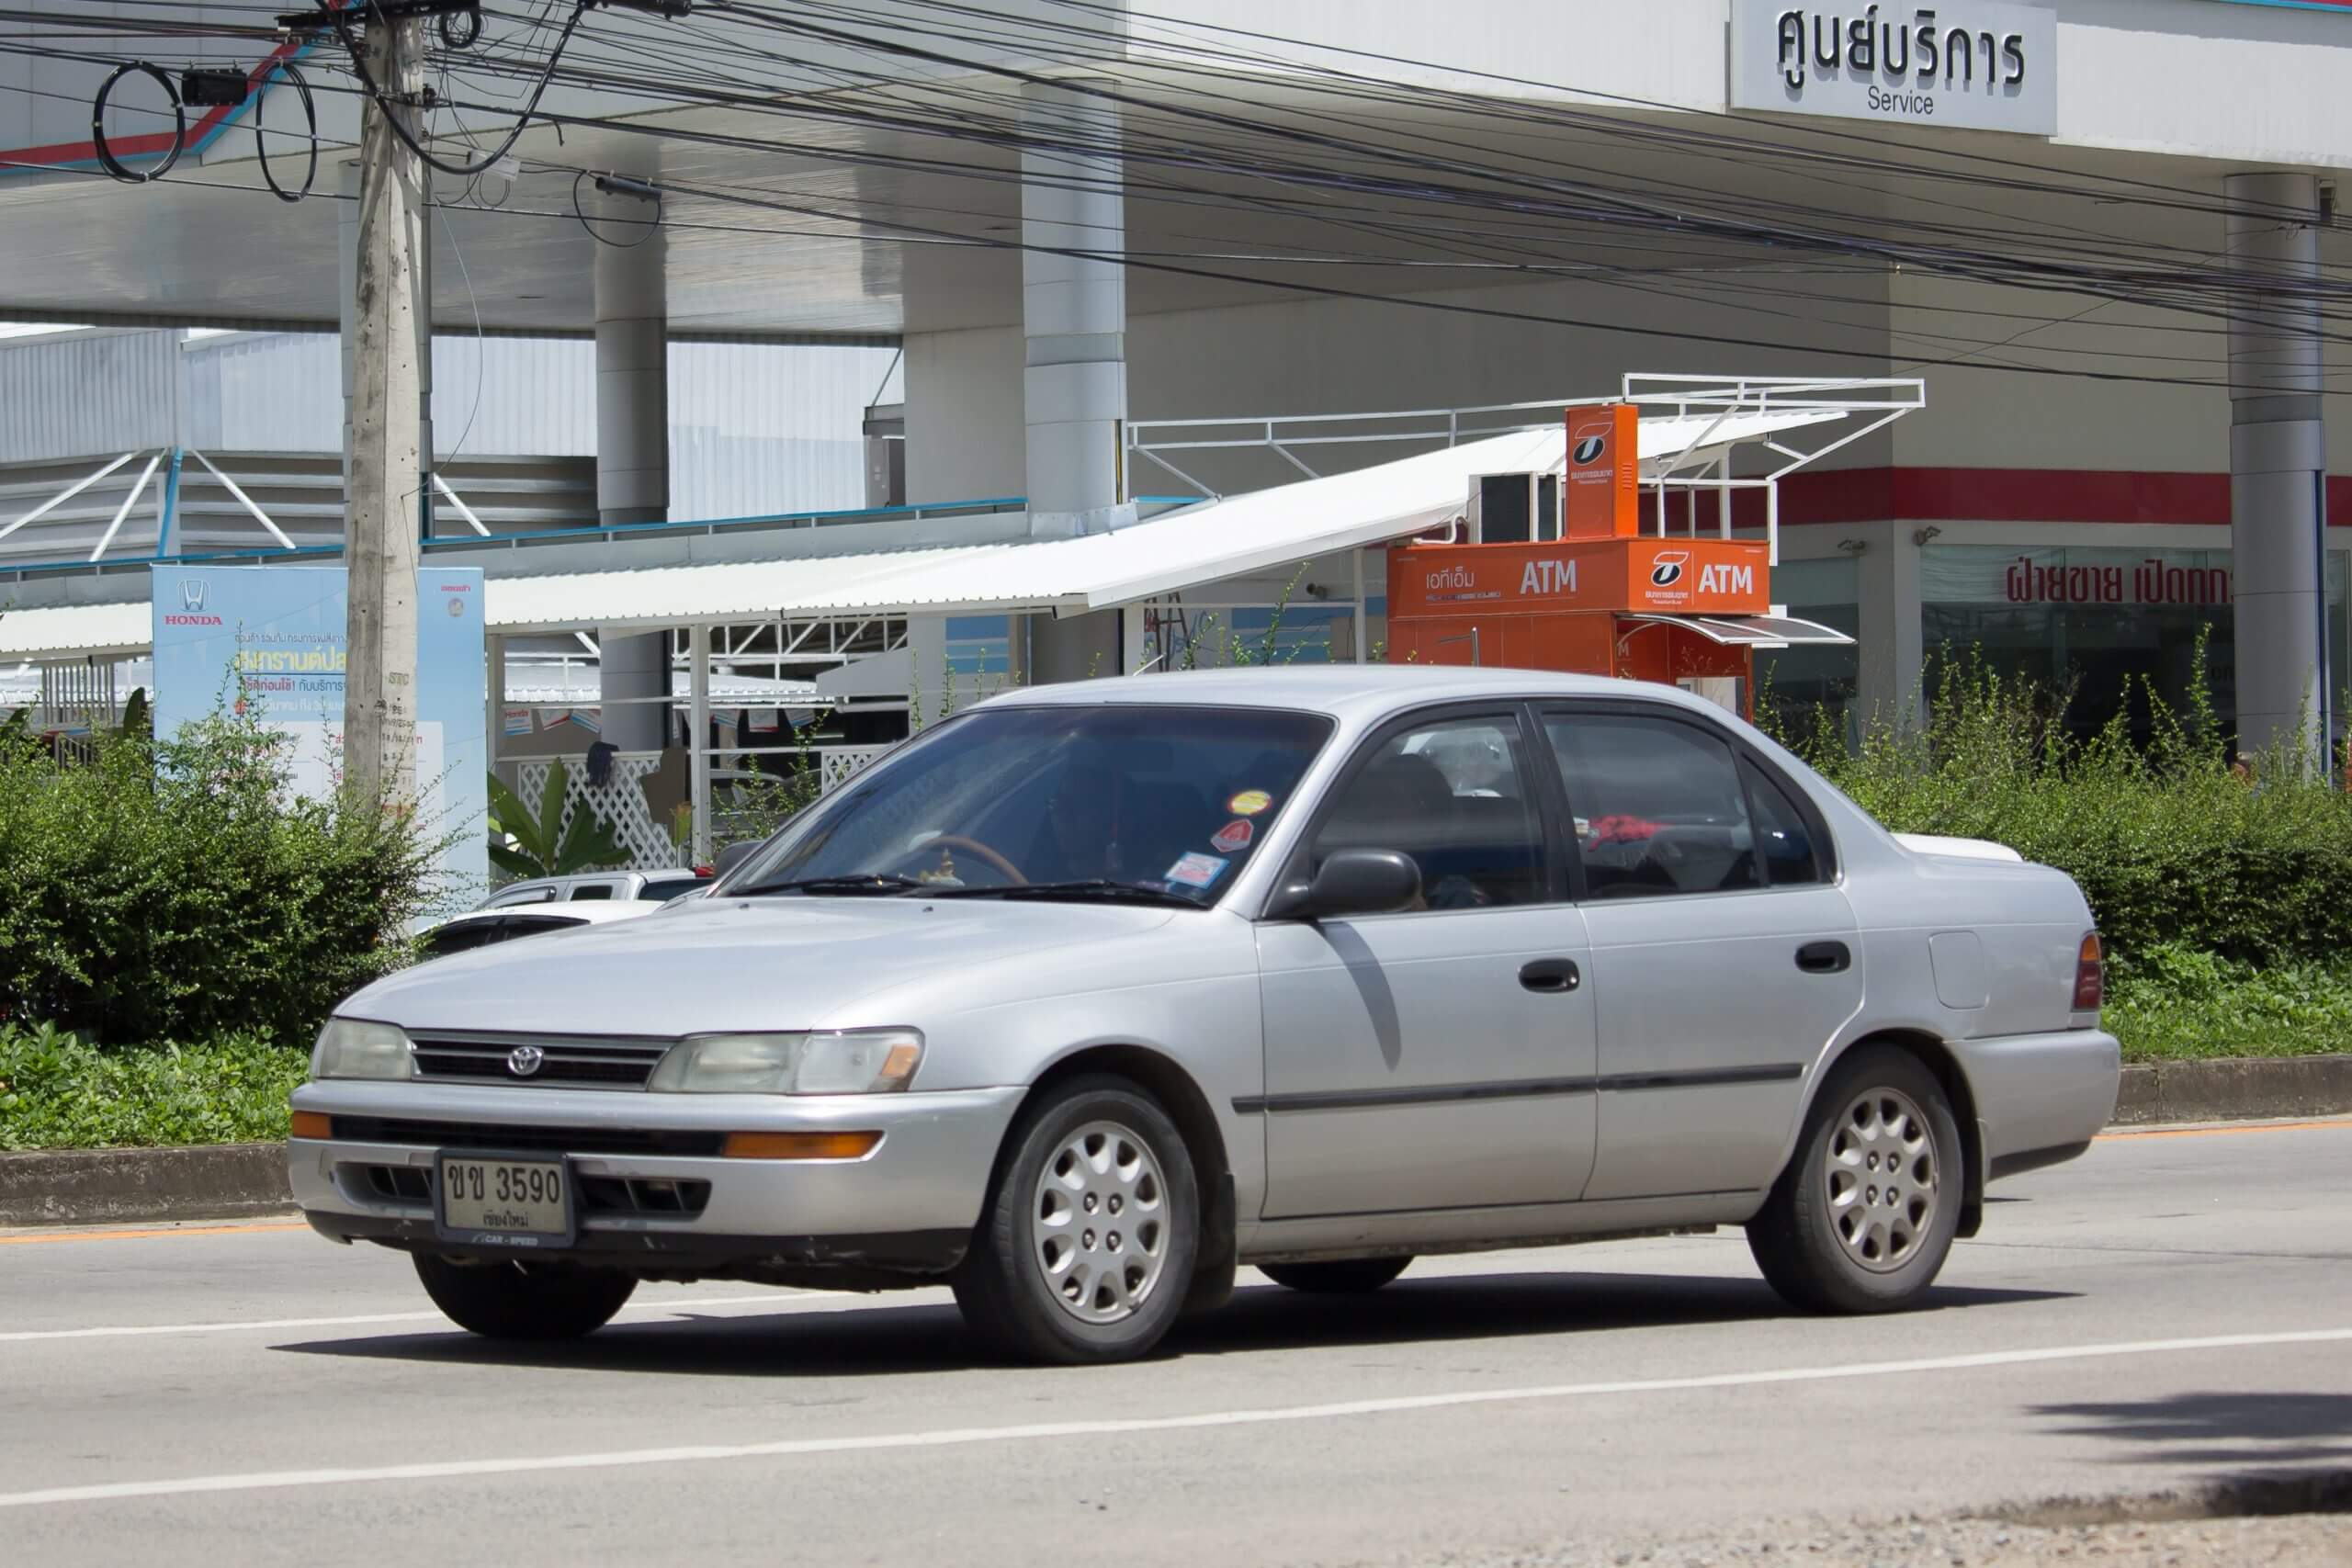  Private Old car, Toyota Corolla. Photo at a road 